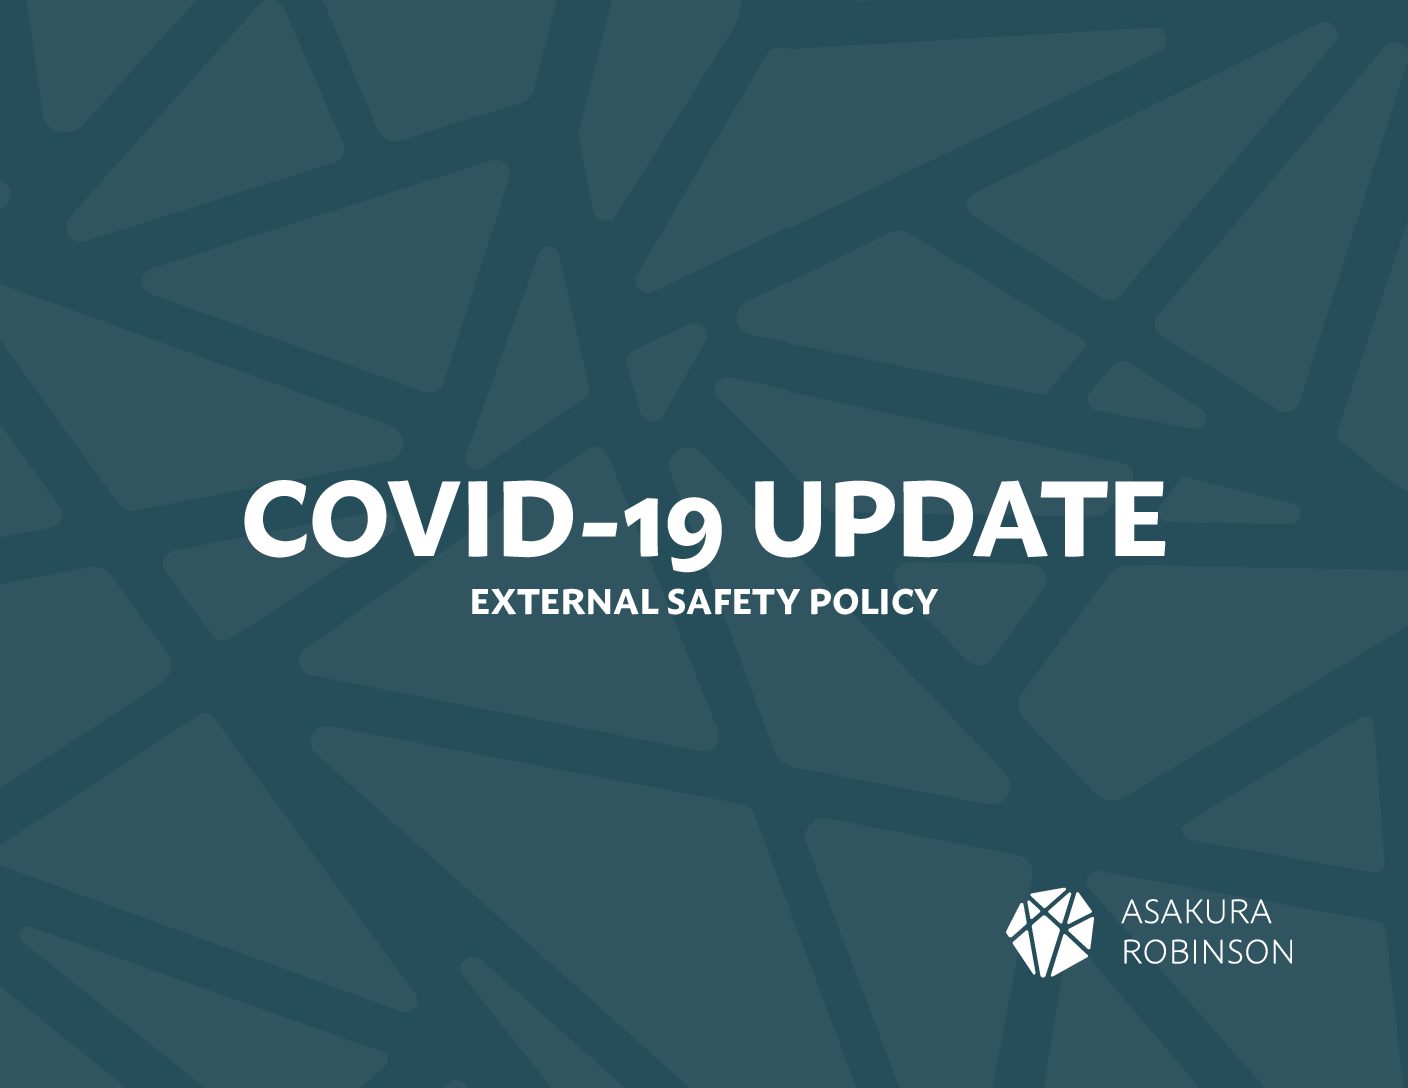 COVID-19 Update: External Safety Policy